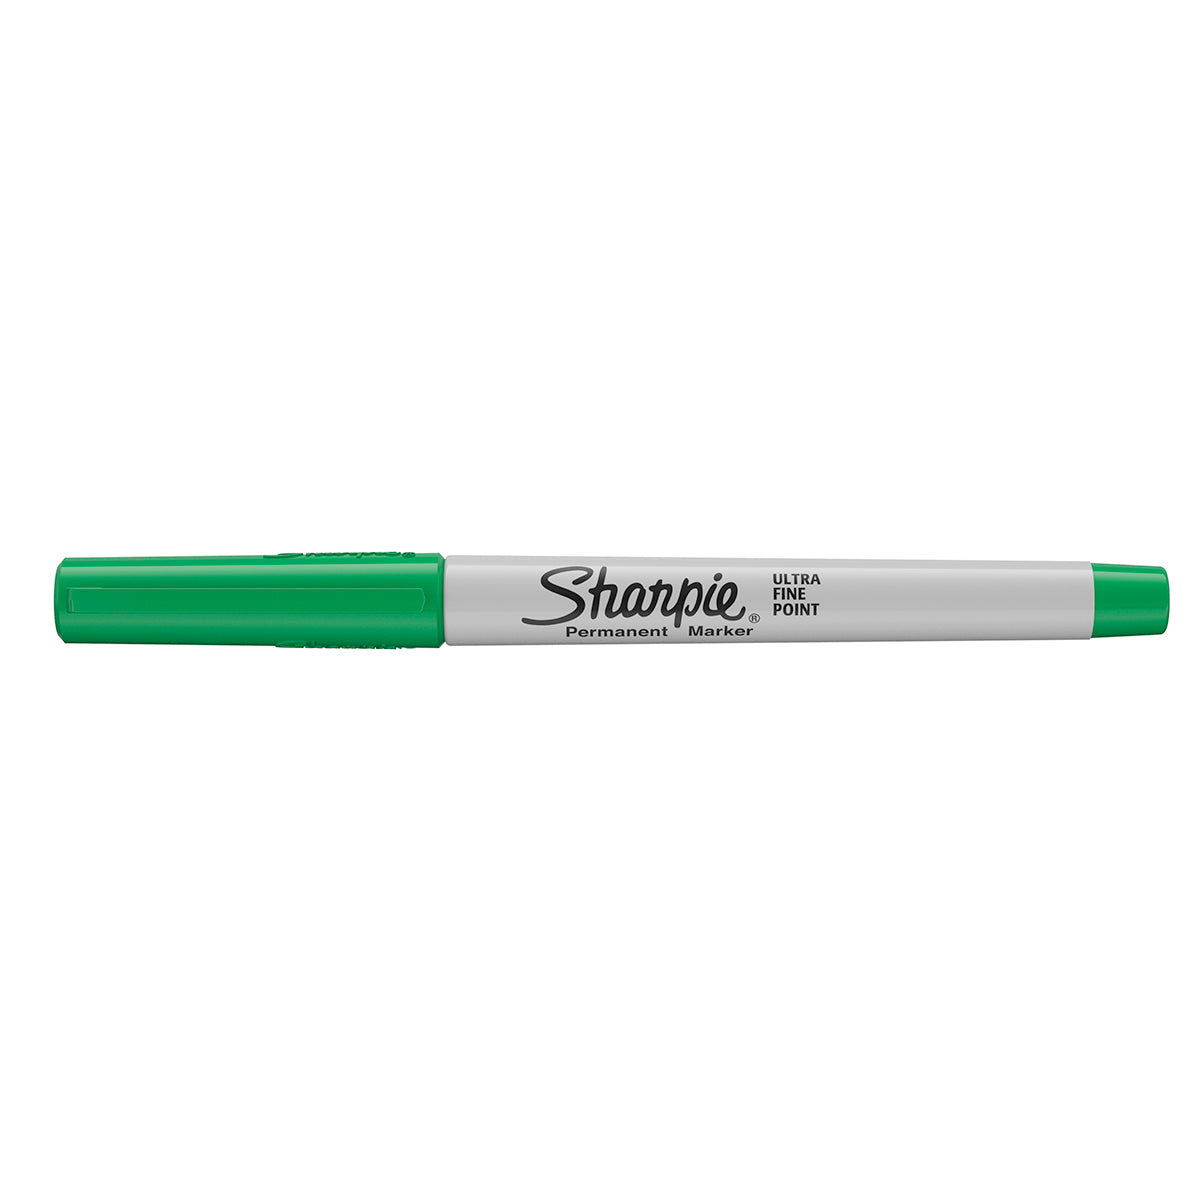 Sharpie Ultra Fine Point Green Permanent MarkerPens and Pencils